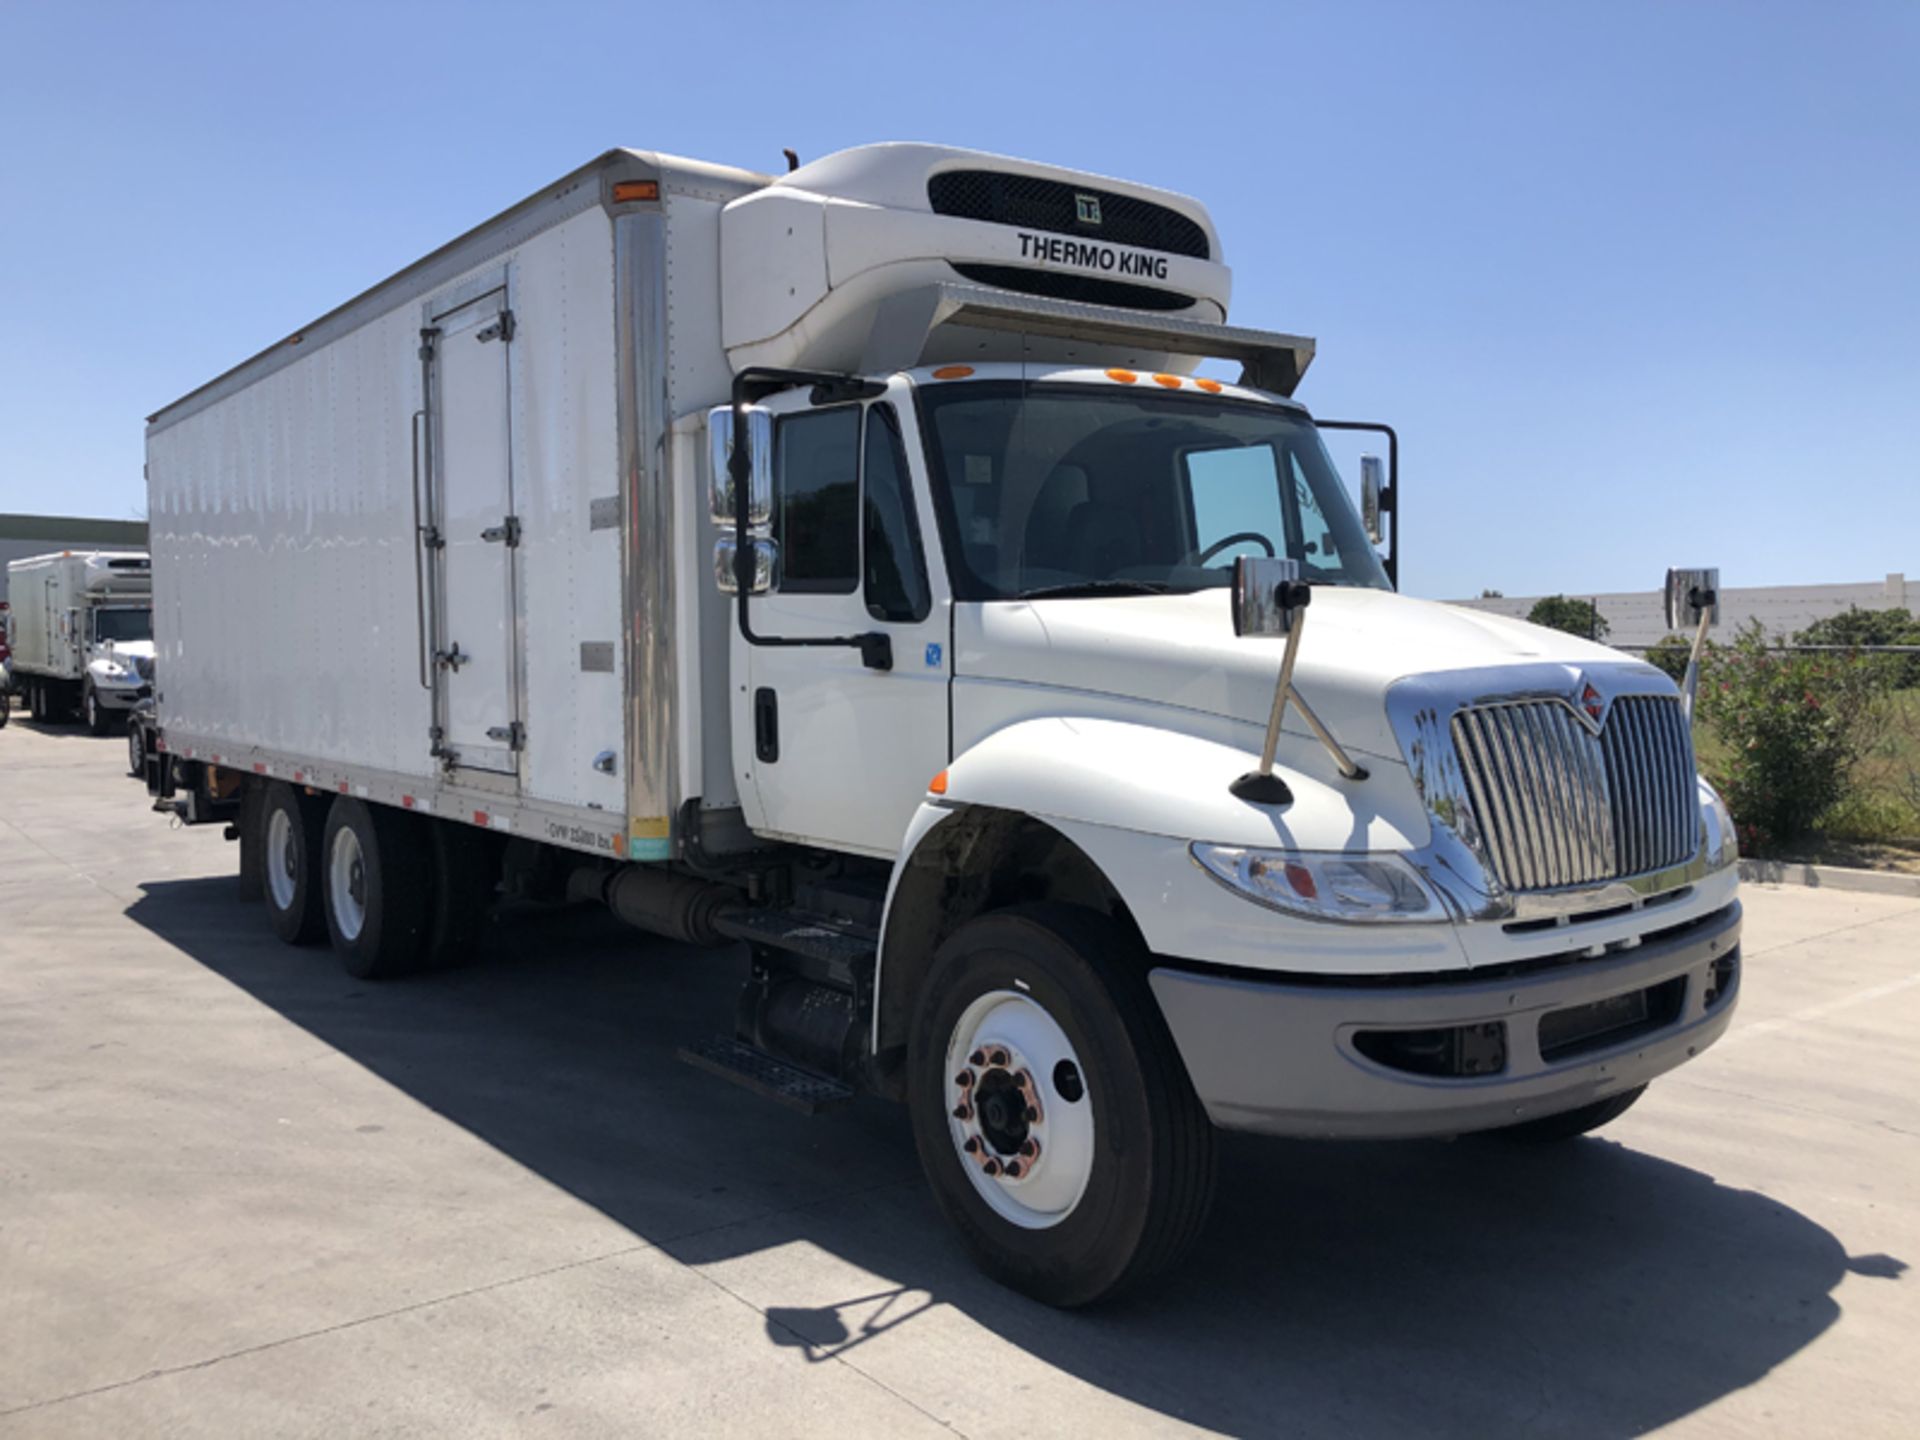 2018 INTERNATIONAL 4400 SBA 6X4 REFRIGERATED BOX TRUCK VIN#: 1HTMSTAR9JH528880, Approx Miles: 85689, - Image 3 of 10